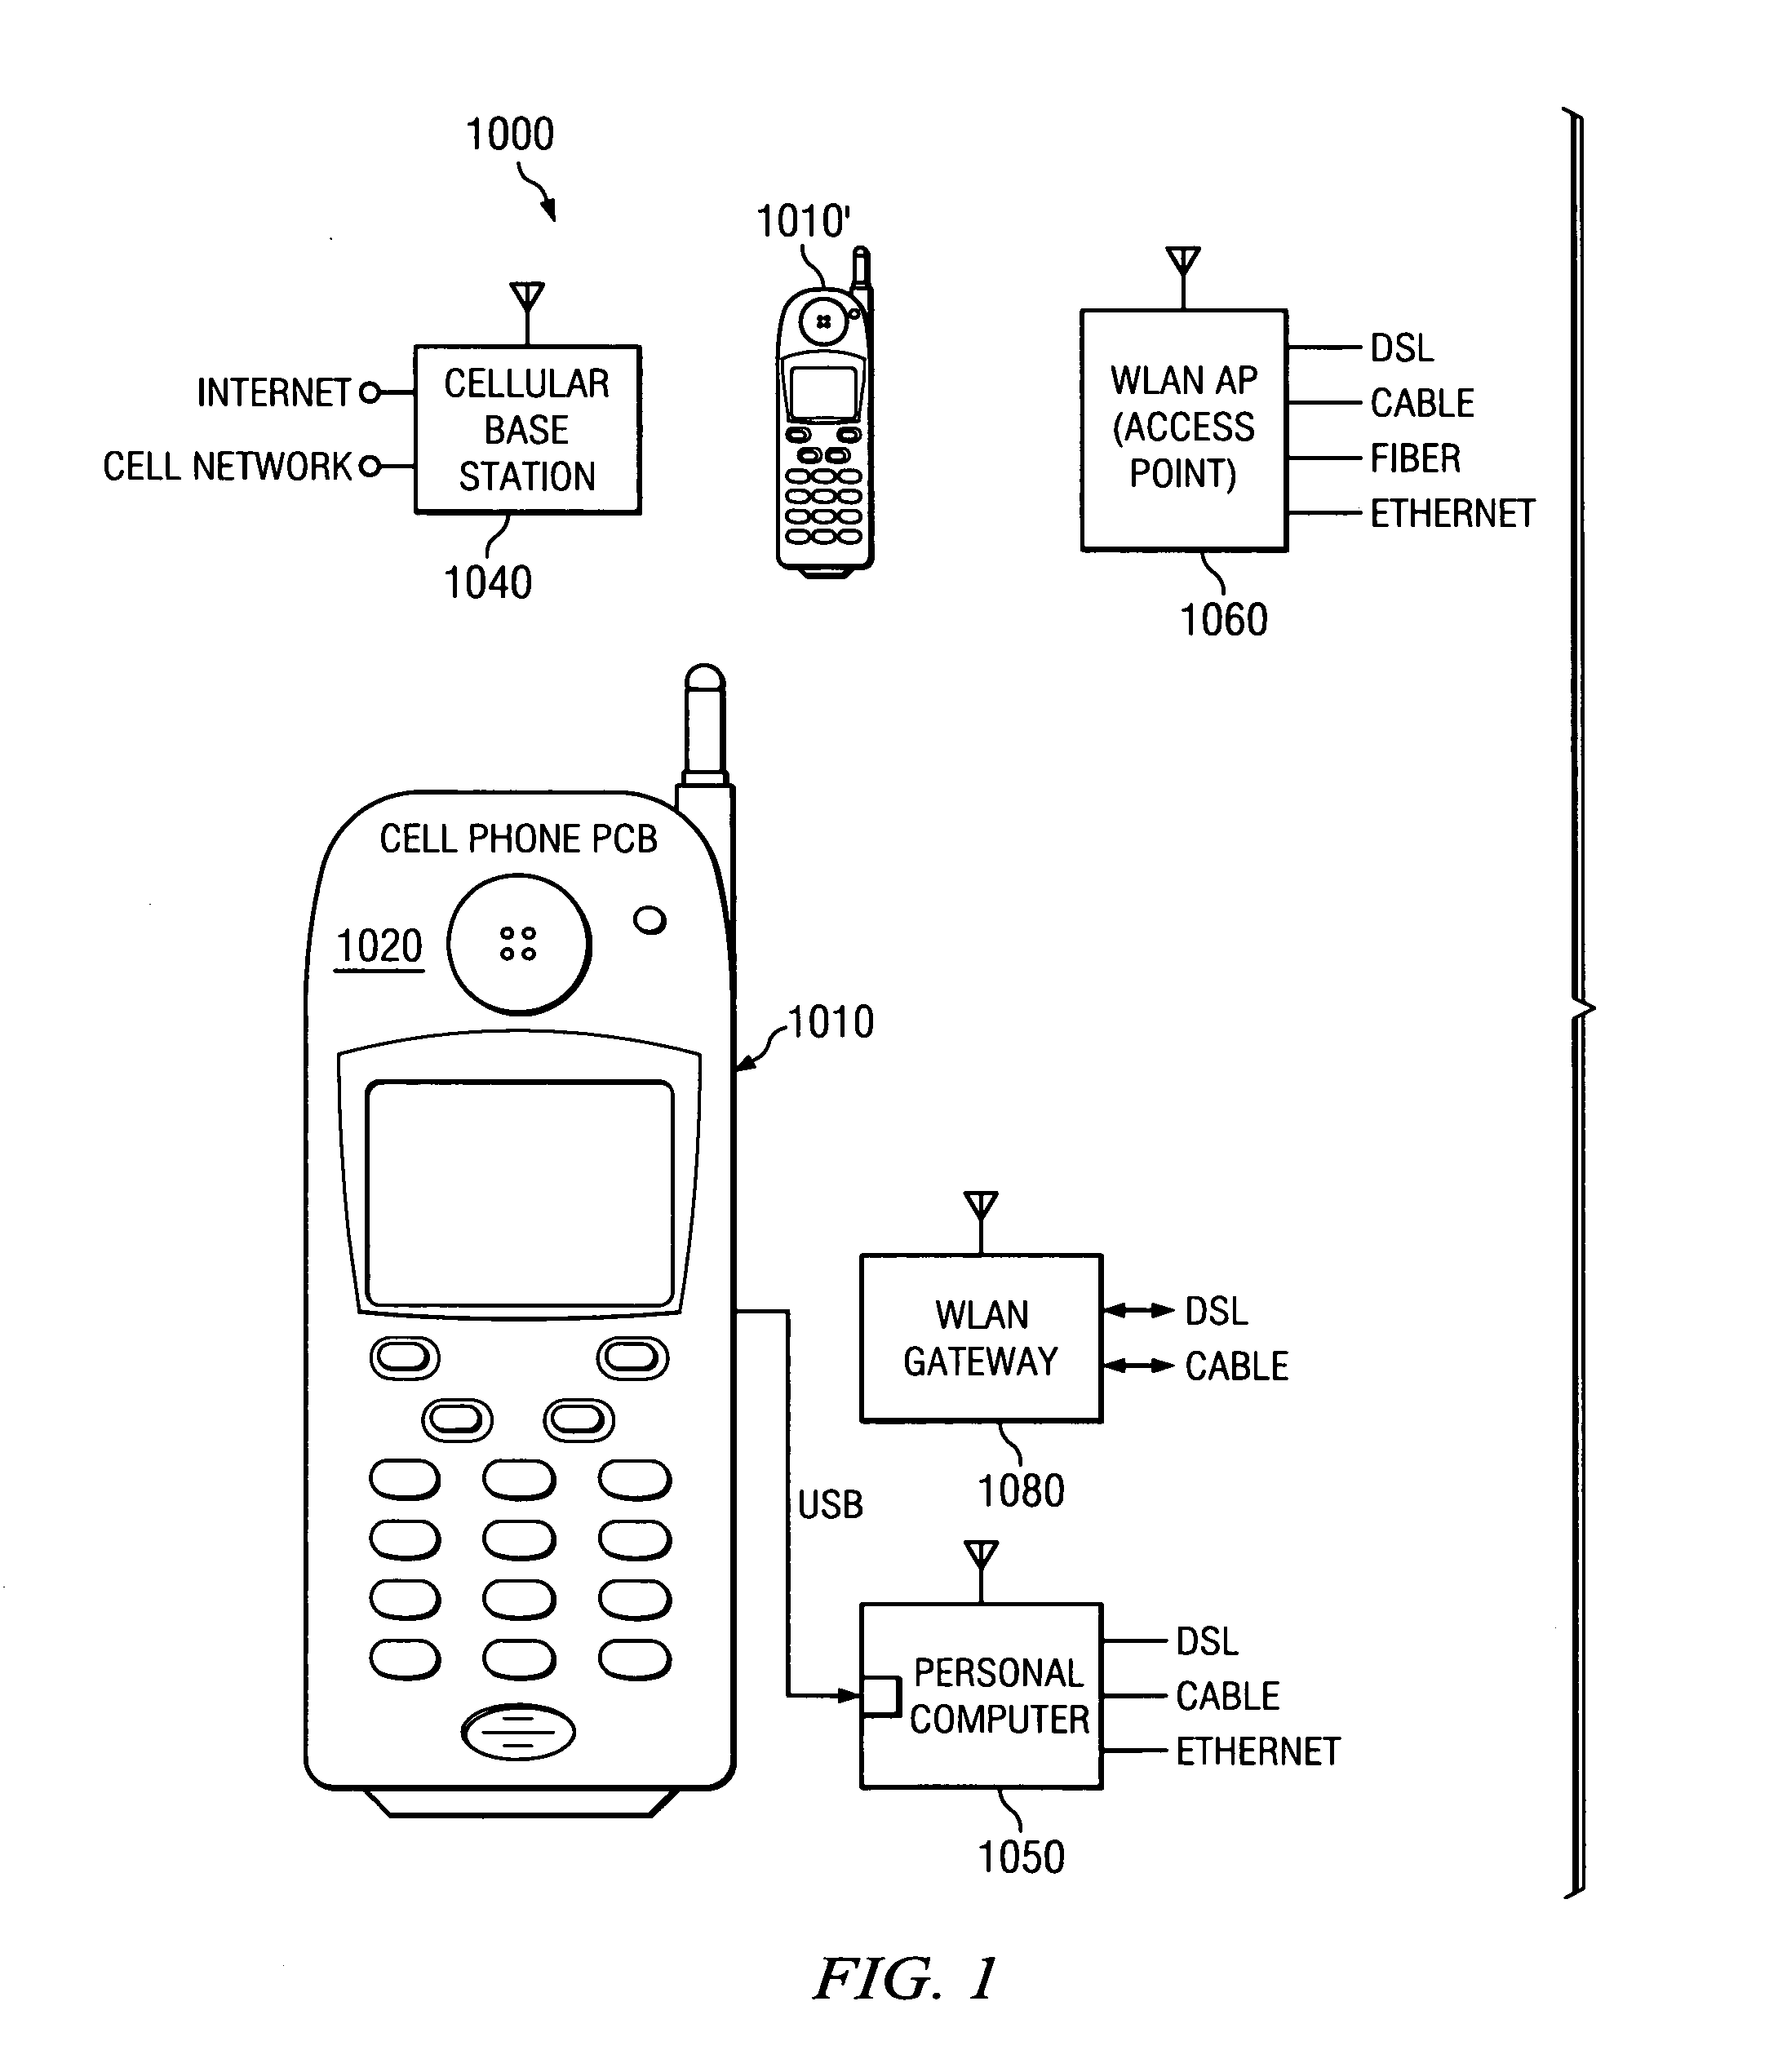 Branch prediction and other processor improvements using FIFO for bypassing certain processor pipeline stages